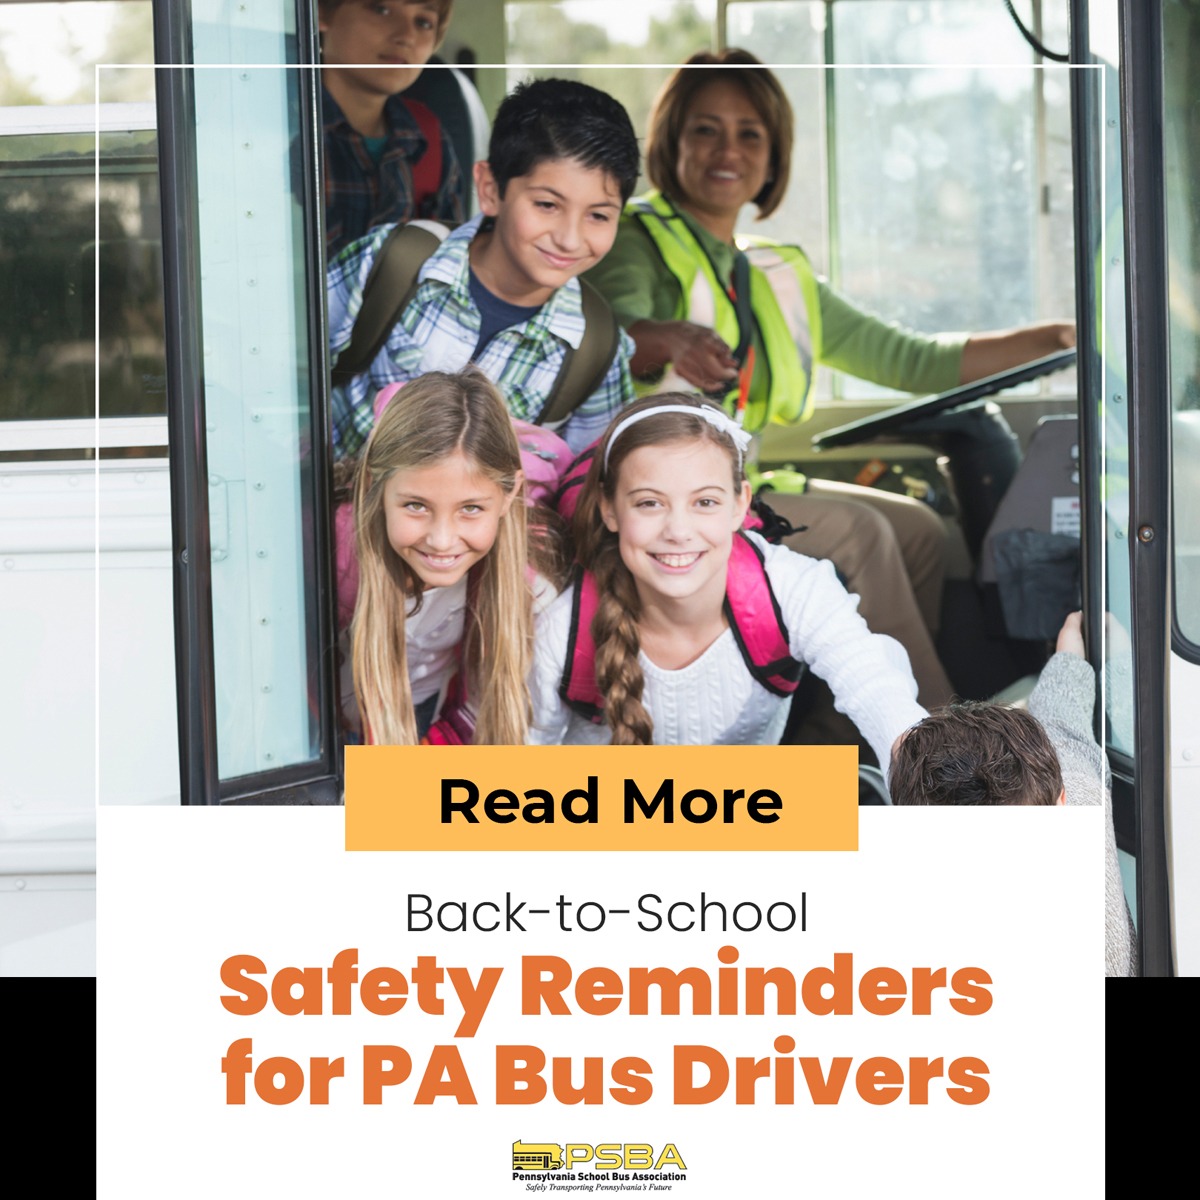 Back-to-School Safety Reminders for PA Bus Drivers